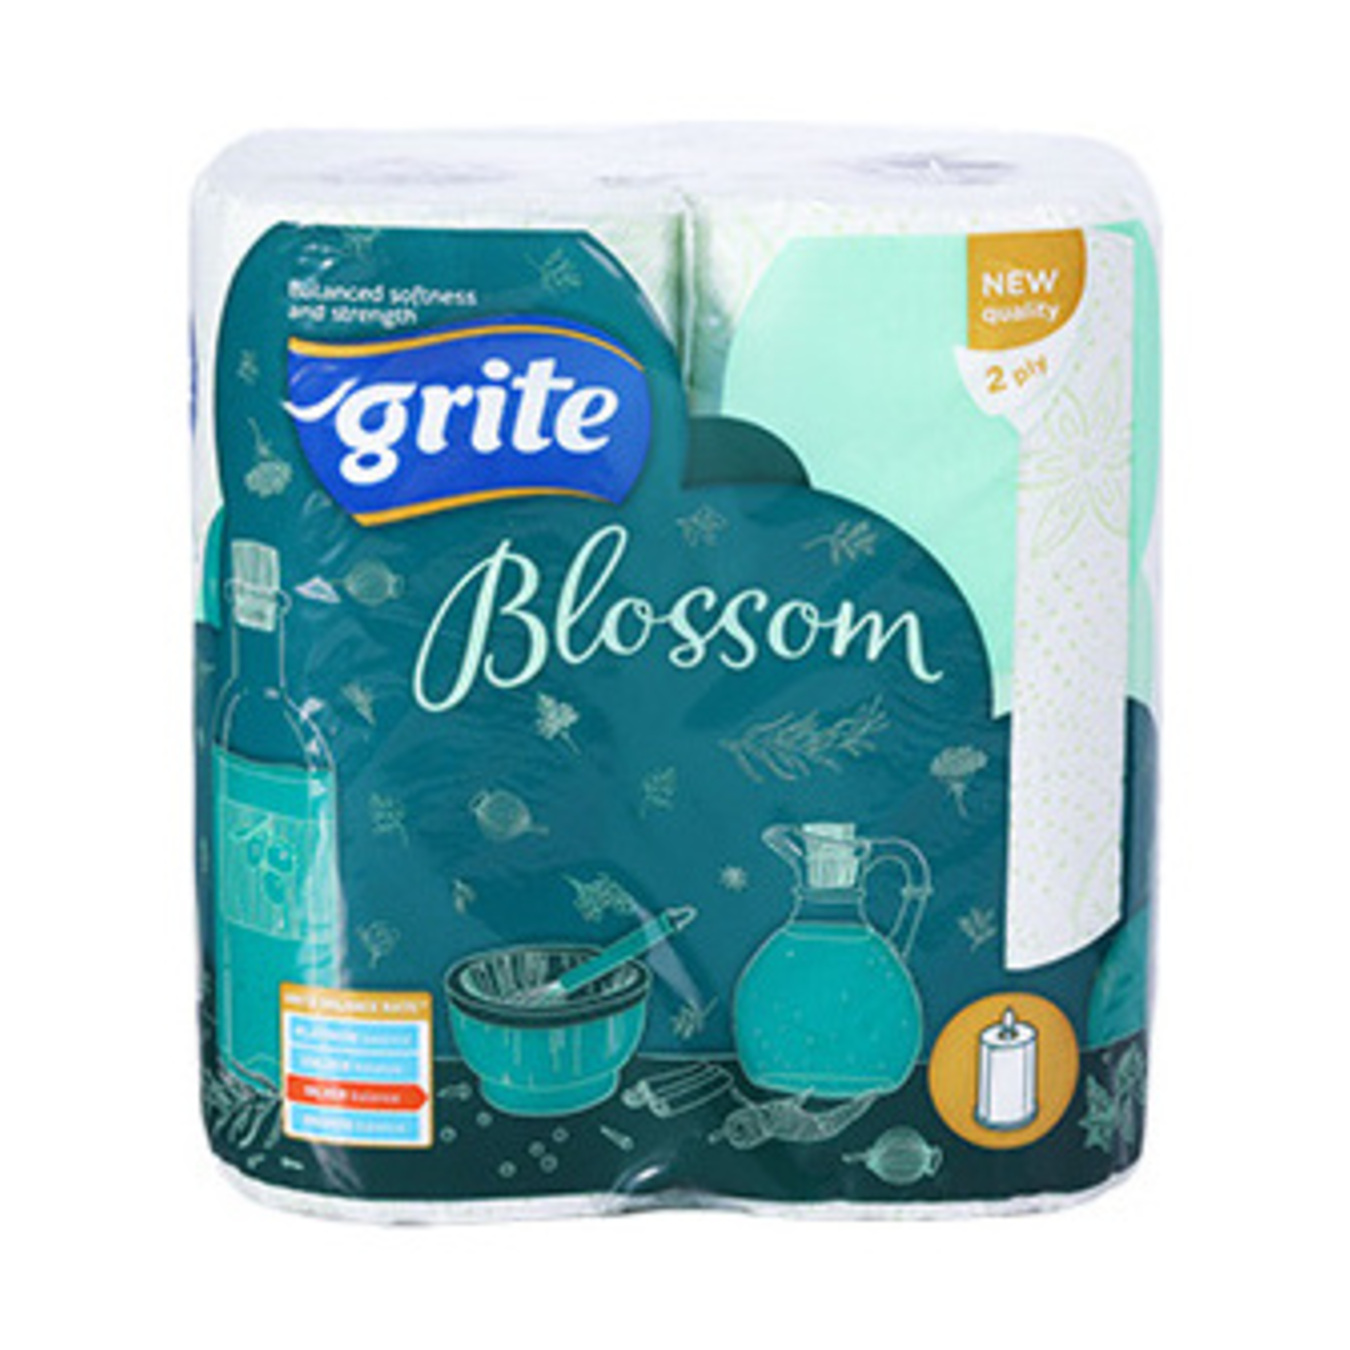 Towels Grite Blossom Paper two-ply 2pcs